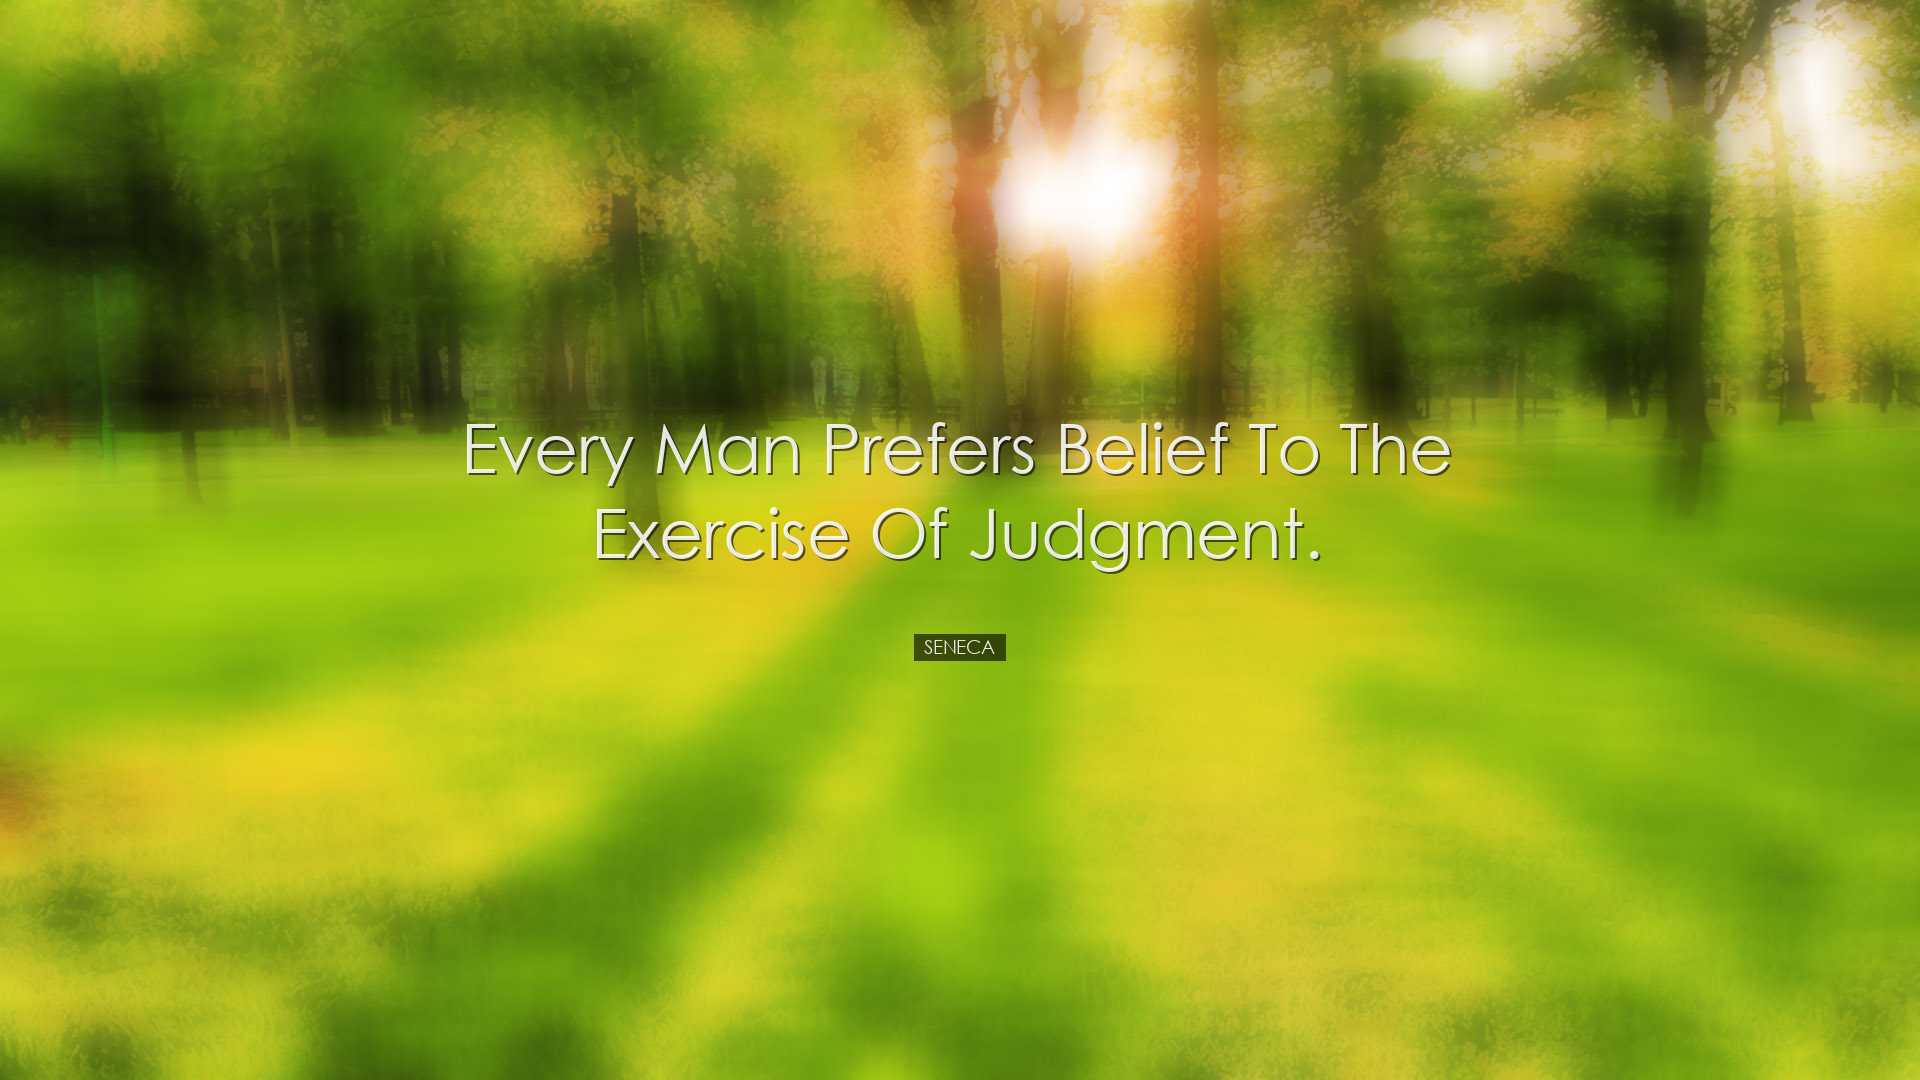 Every man prefers belief to the exercise of judgment. - Seneca